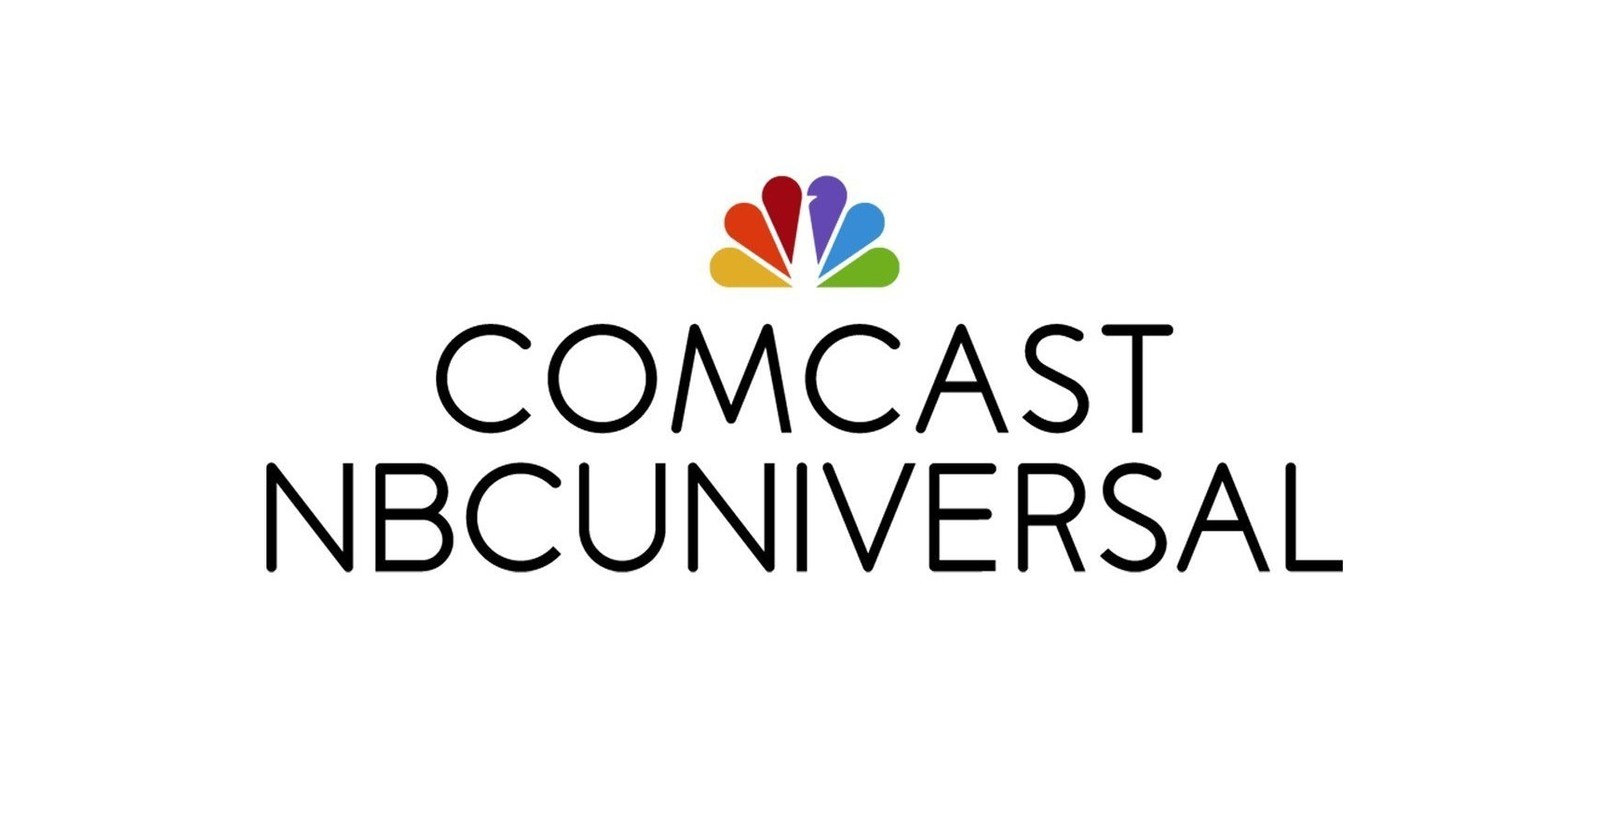 Comcast’s Online Essentials Program Announces $200,000 in Grants and Begins Distributing 3,000 Laptops to Baltimore Metropolis Businesses Committed to Workforce Progress and Electronic Fairness